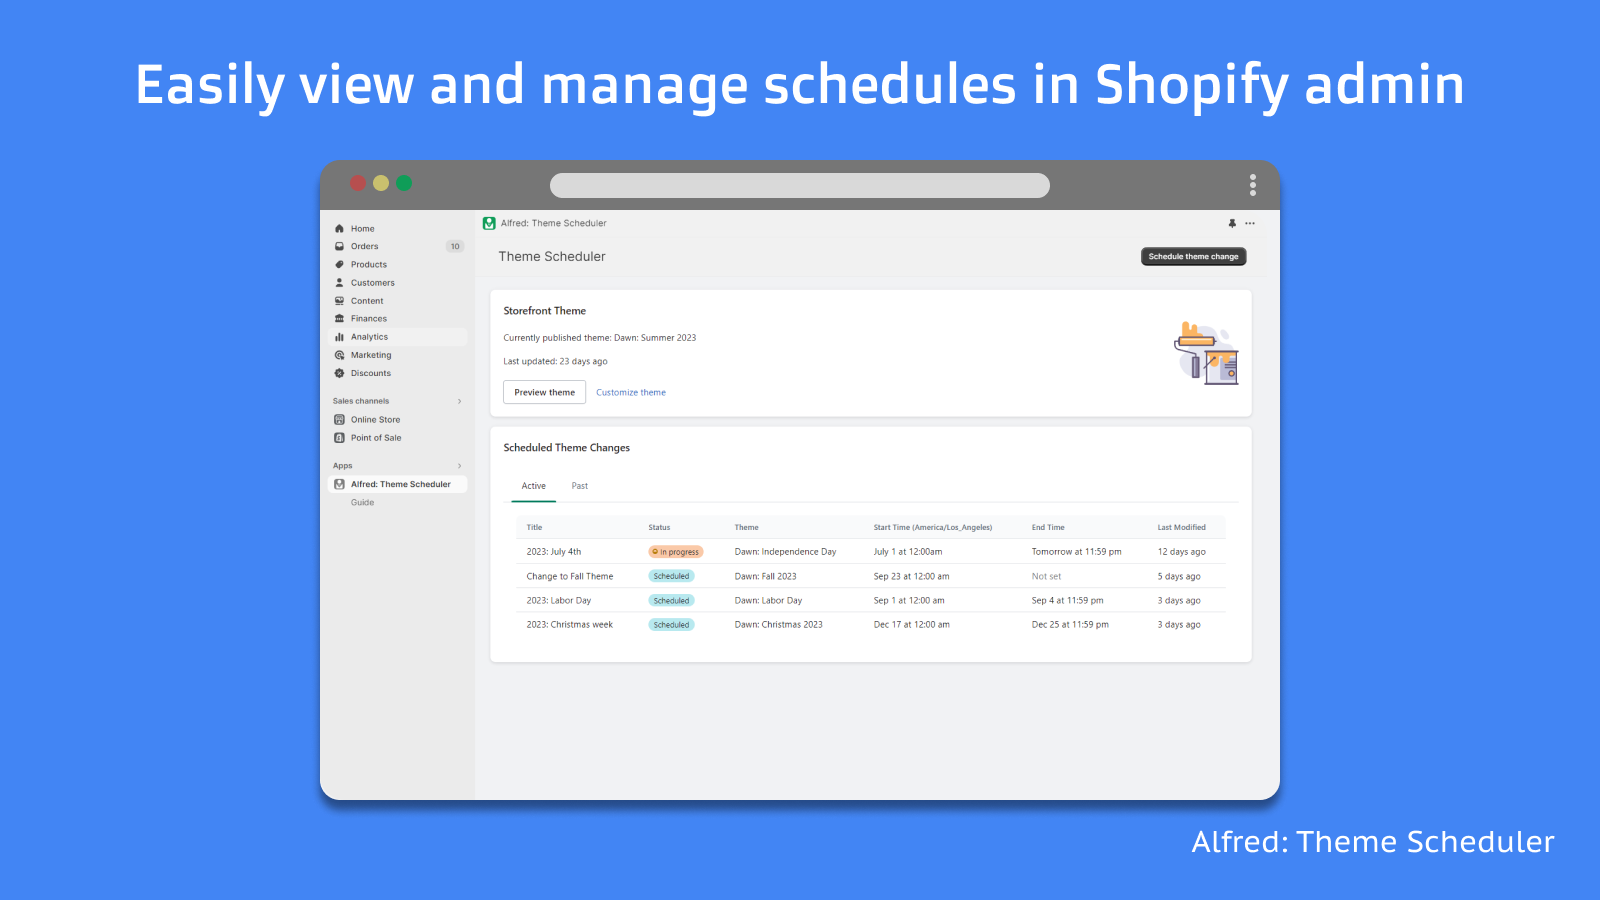 Easily view and manage past and current scheduled theme changes